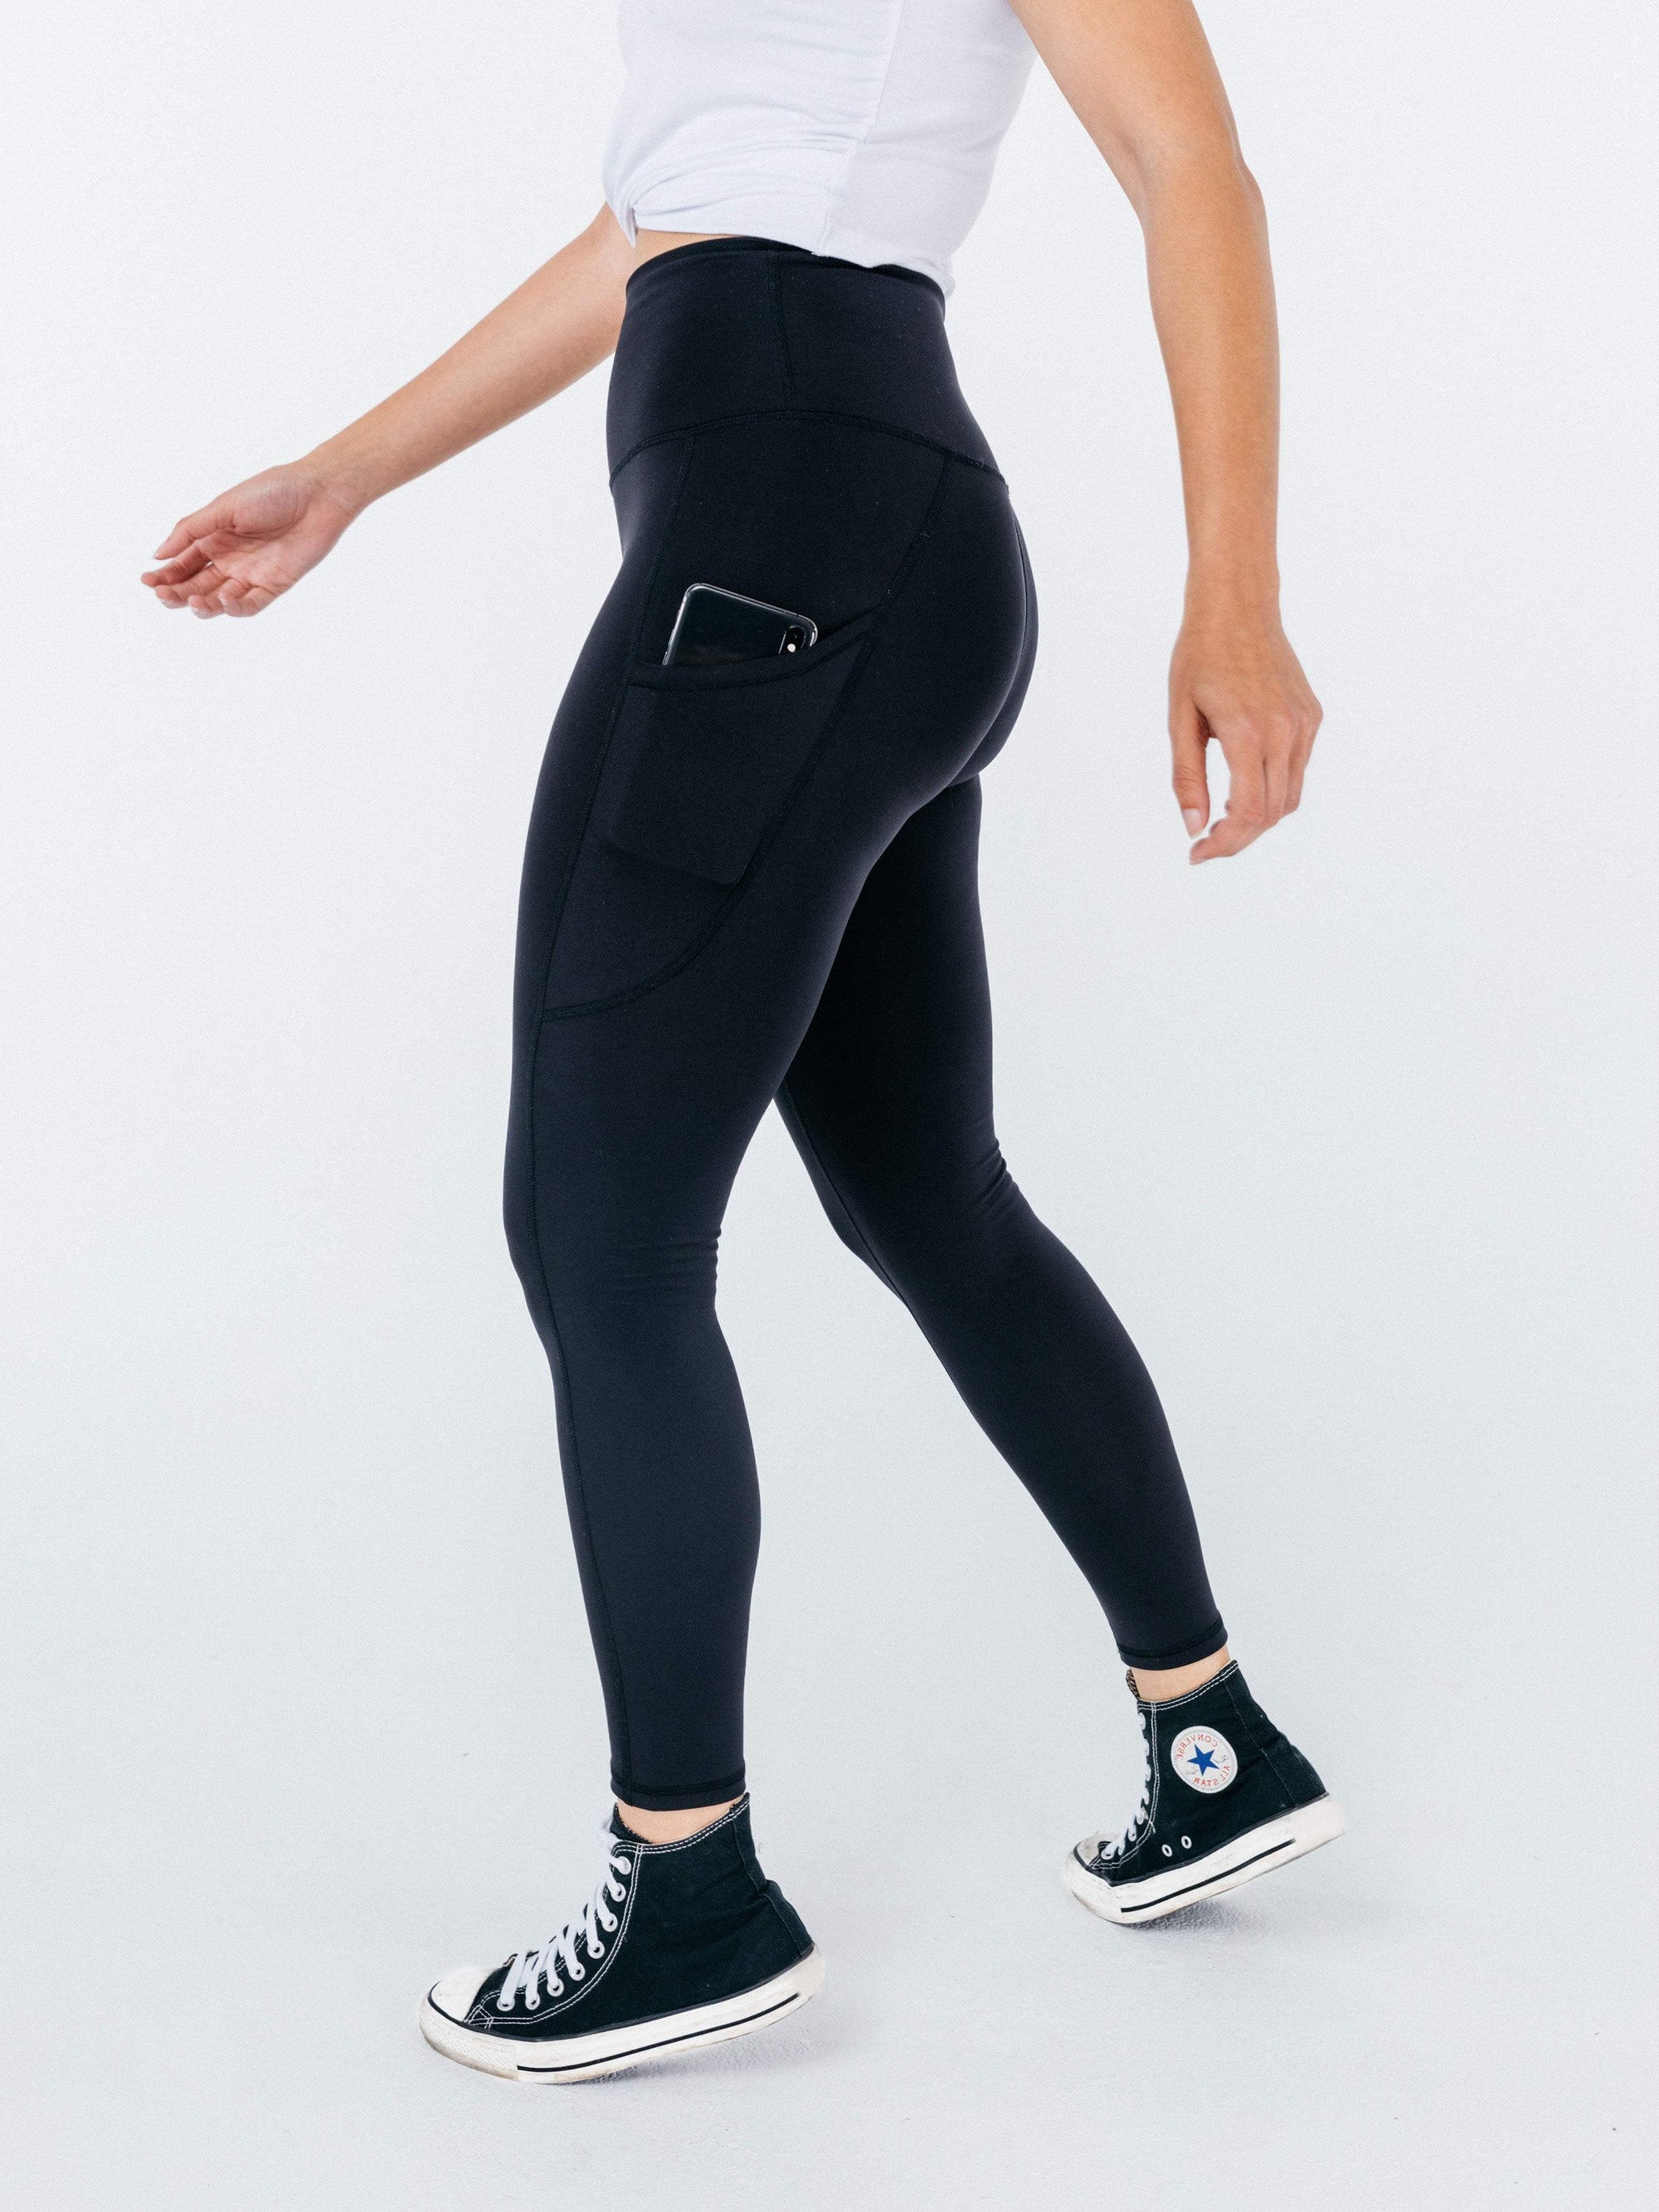 Sometimes you just want to wear black leggings :-) Invigorate 25 in Black ( 6). Swiftly Tech LS in Lavender Dew (8, ✂️). Free to be Serene in Highlight  Orange (4) : r/lululemon